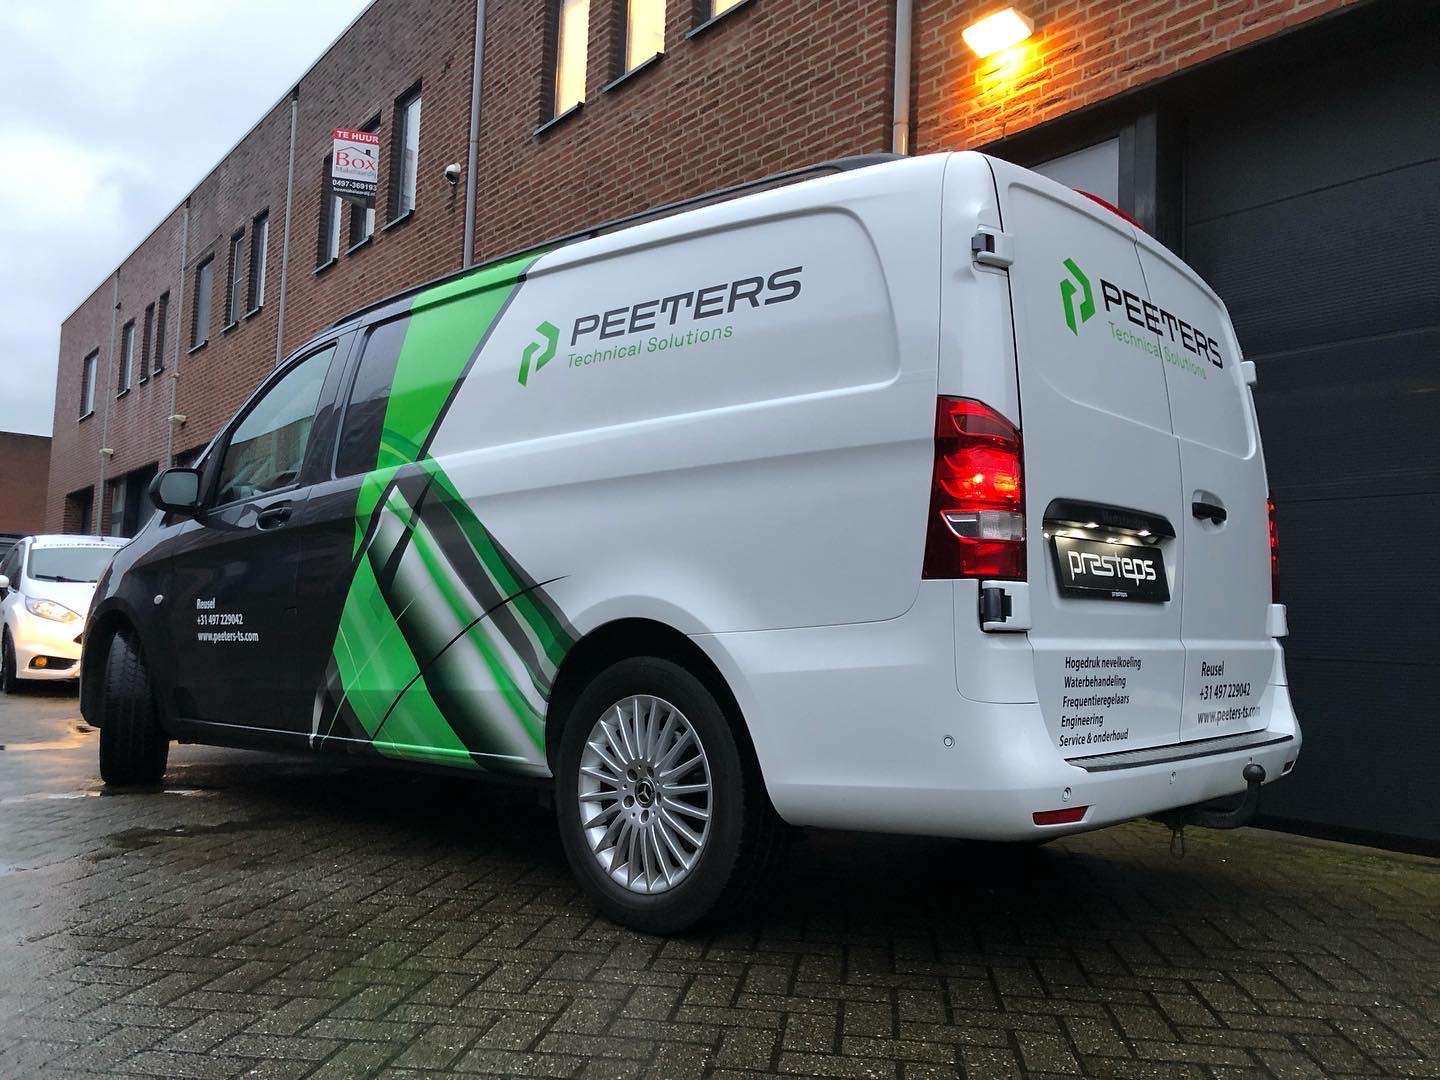 Busbelettering Vito Peeters technical solutions wit